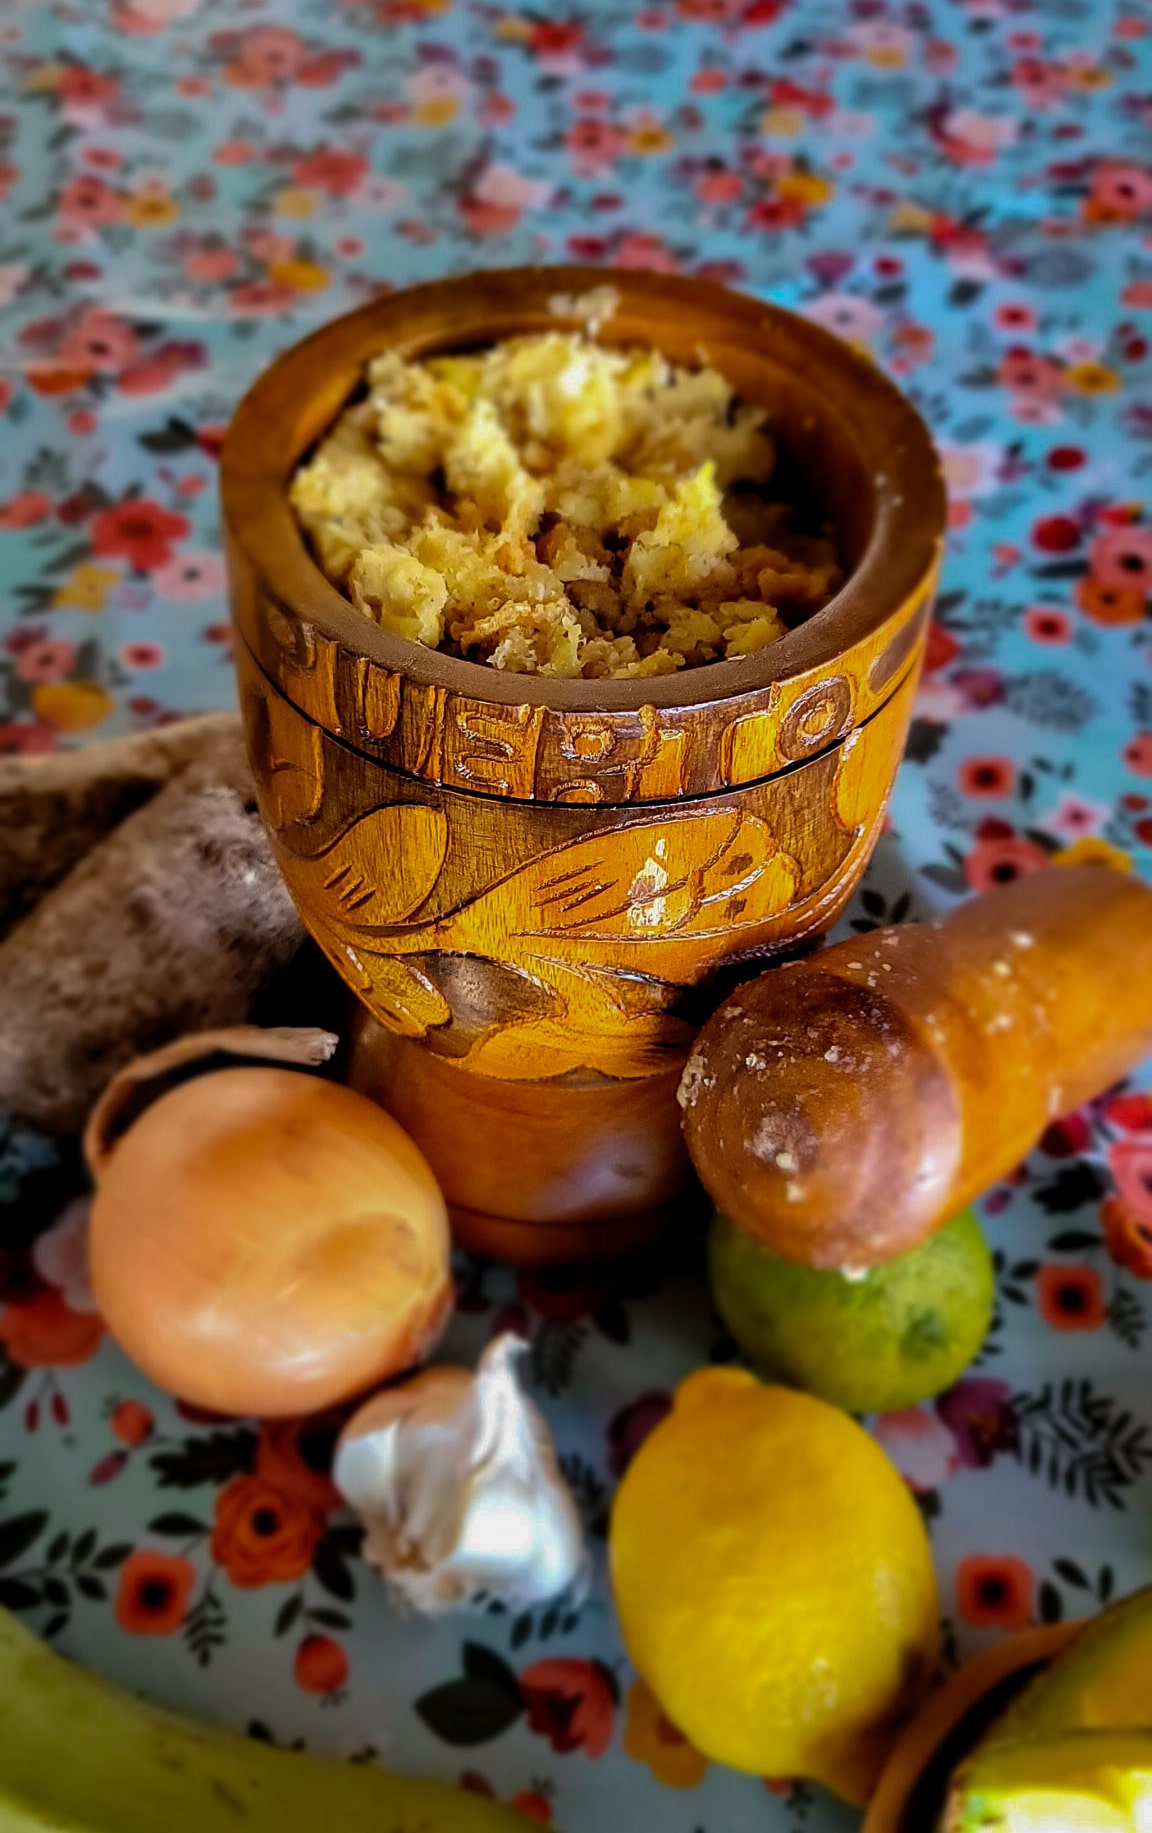 pestle and mortar filled with mofongo